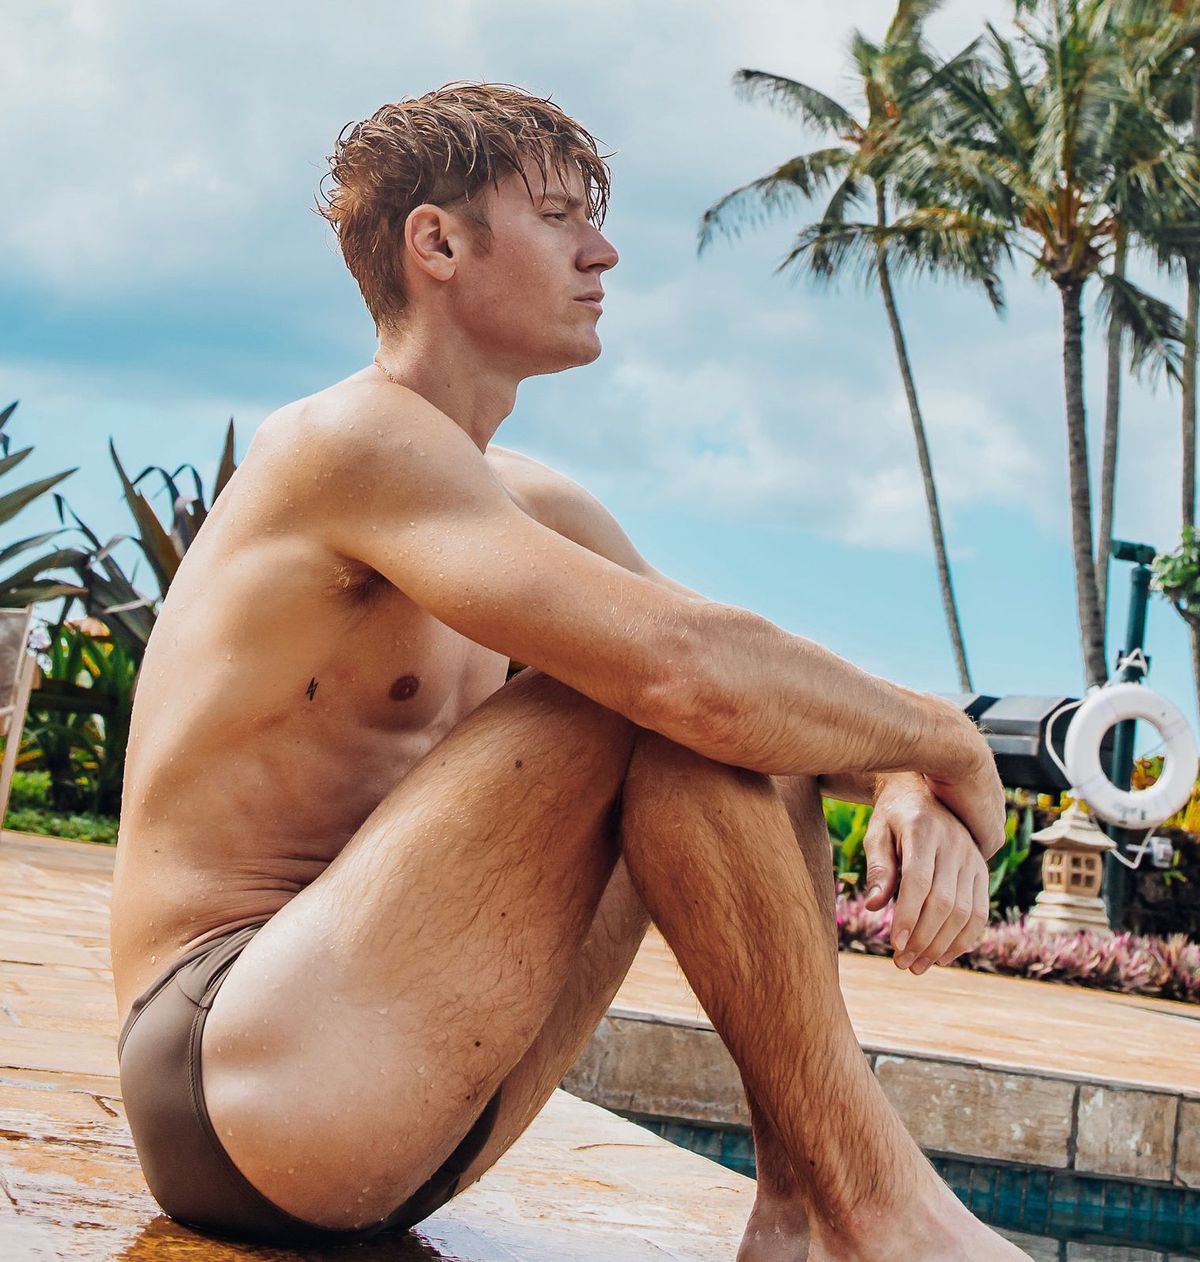 Zack Taylor sits by a pool in a swimsuit.